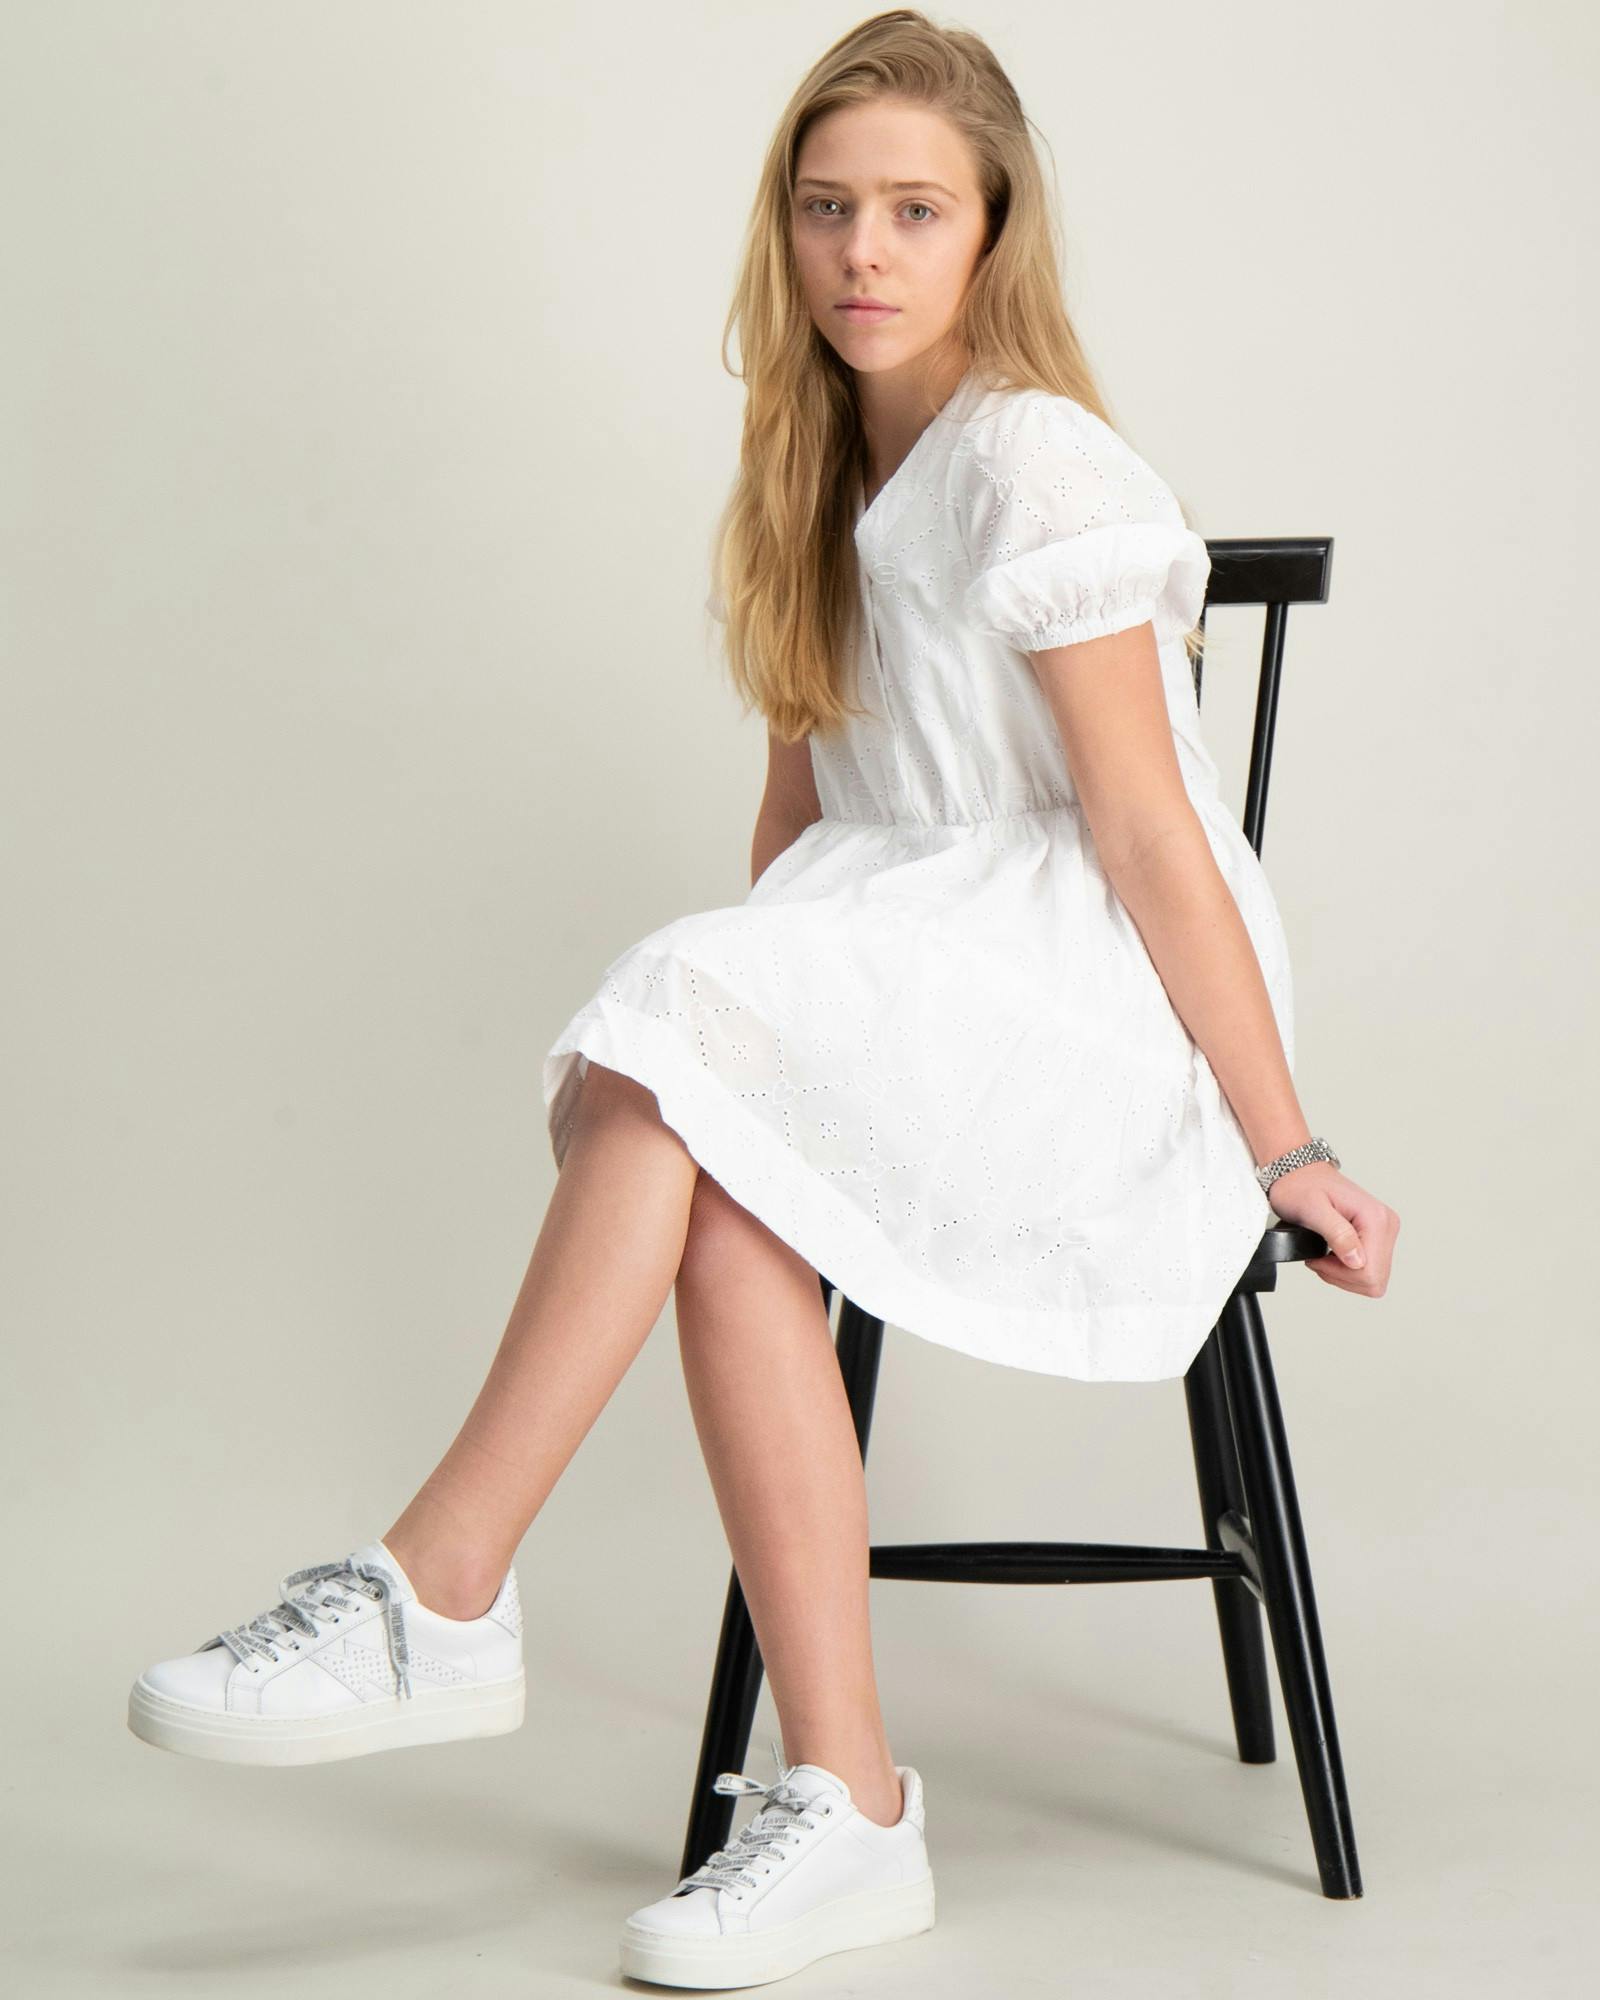 BRODERIE ANGLAISE DRESS